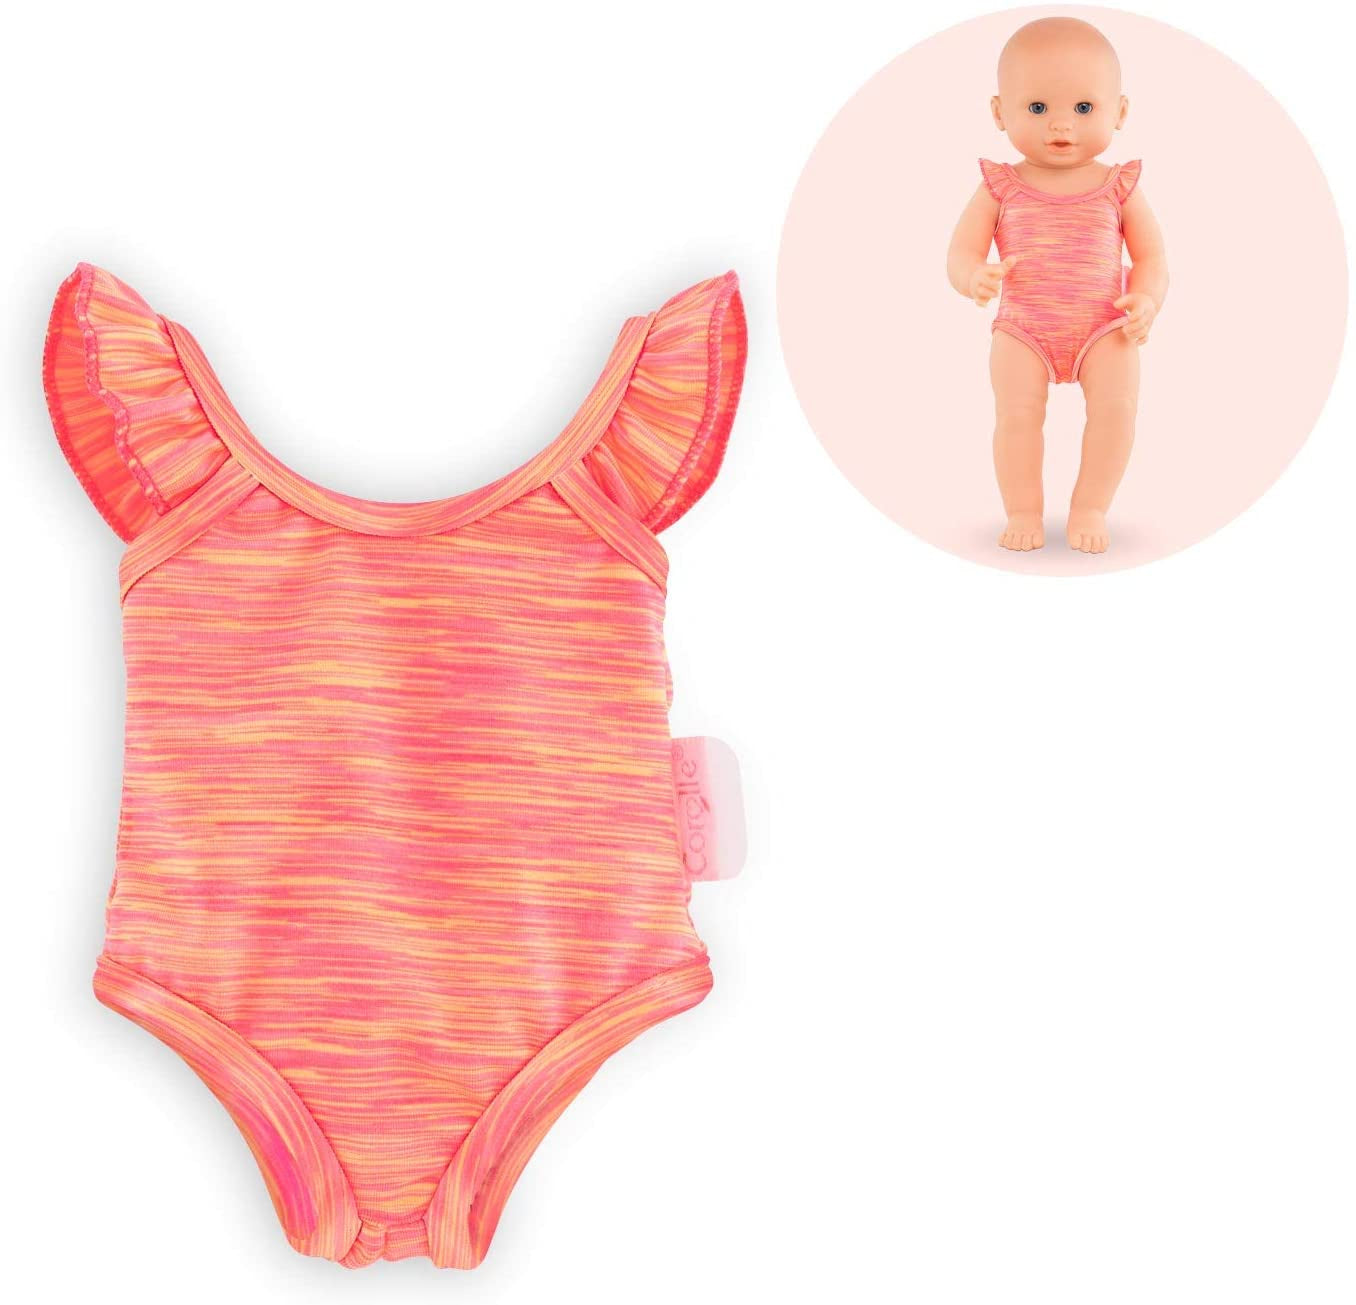 Corolle - Mon Classique - Clothing - Swimming Costume - 36cm Baby Doll